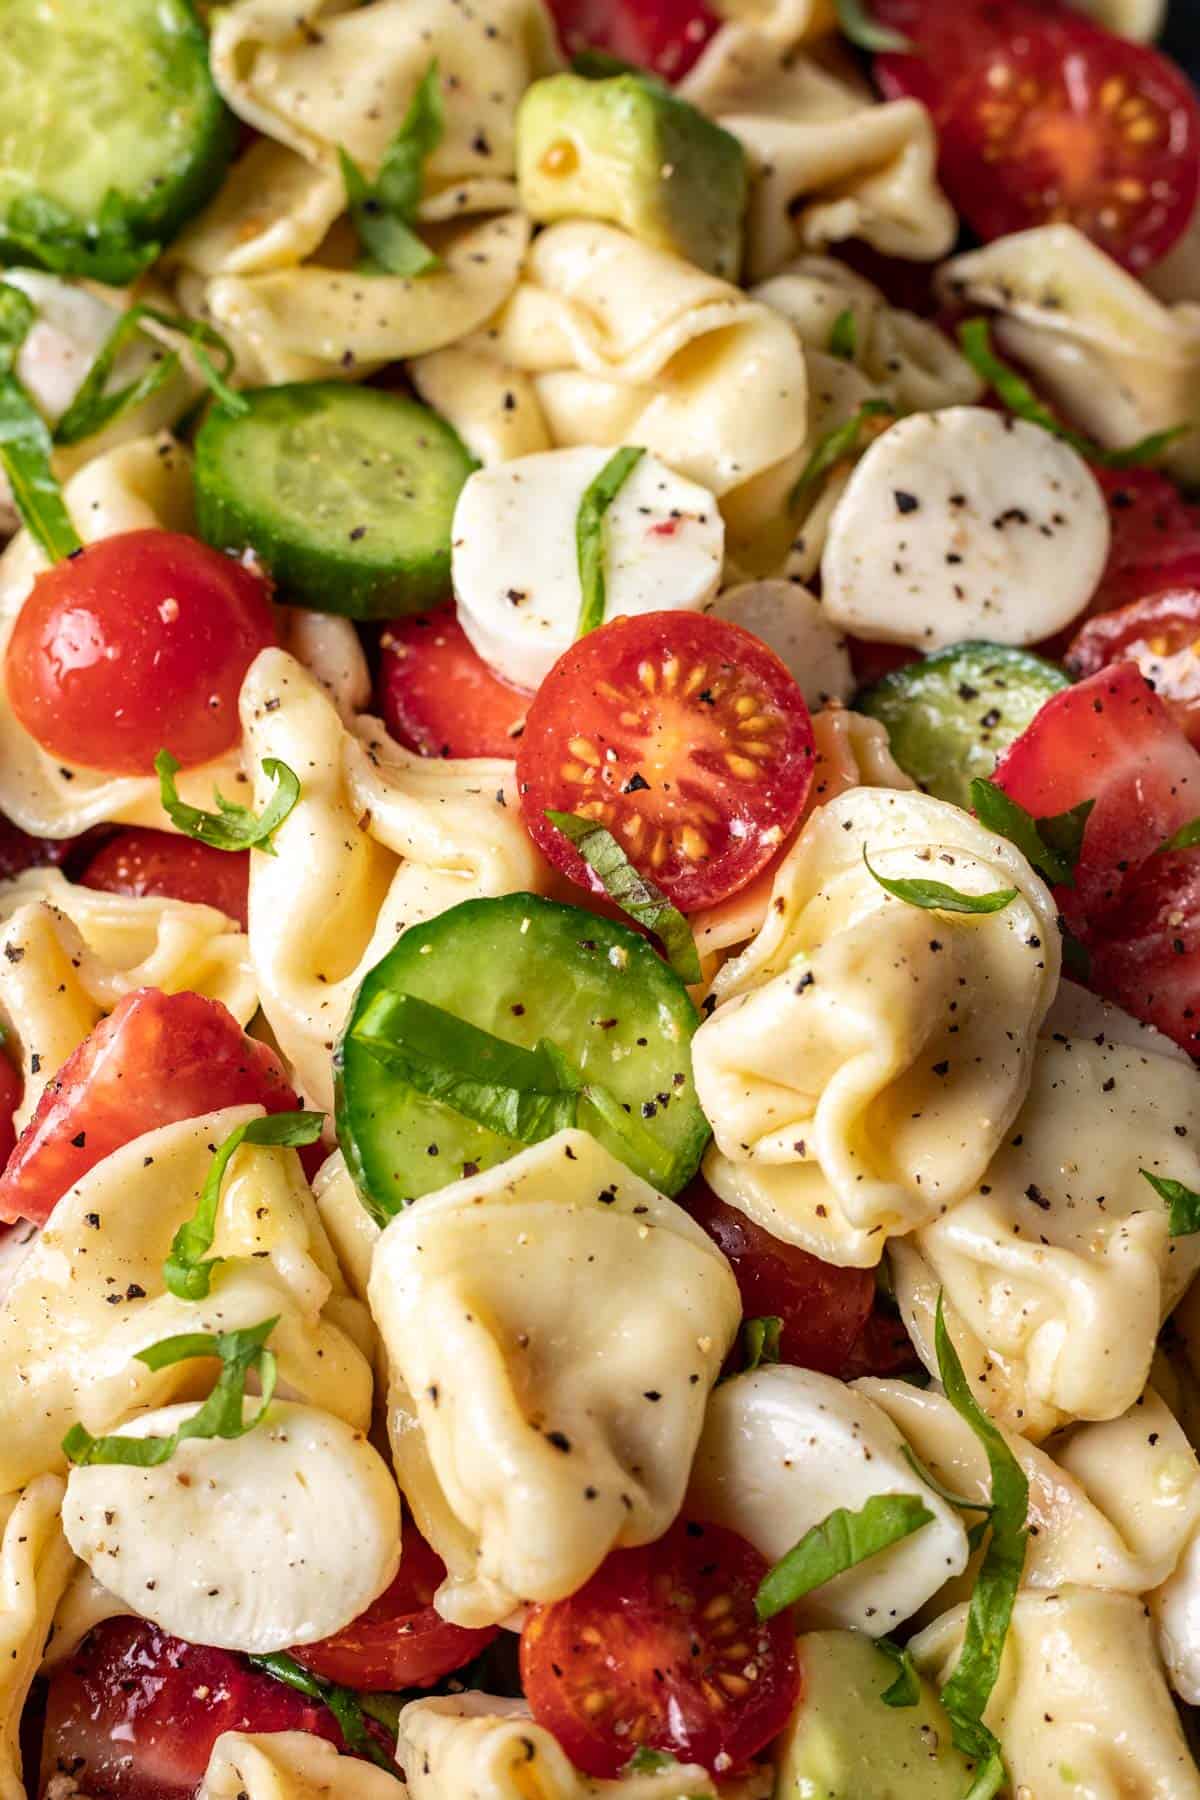 Tortellini, cucumbers, tomatoes, basil, and mozzarella cheese mixed together.